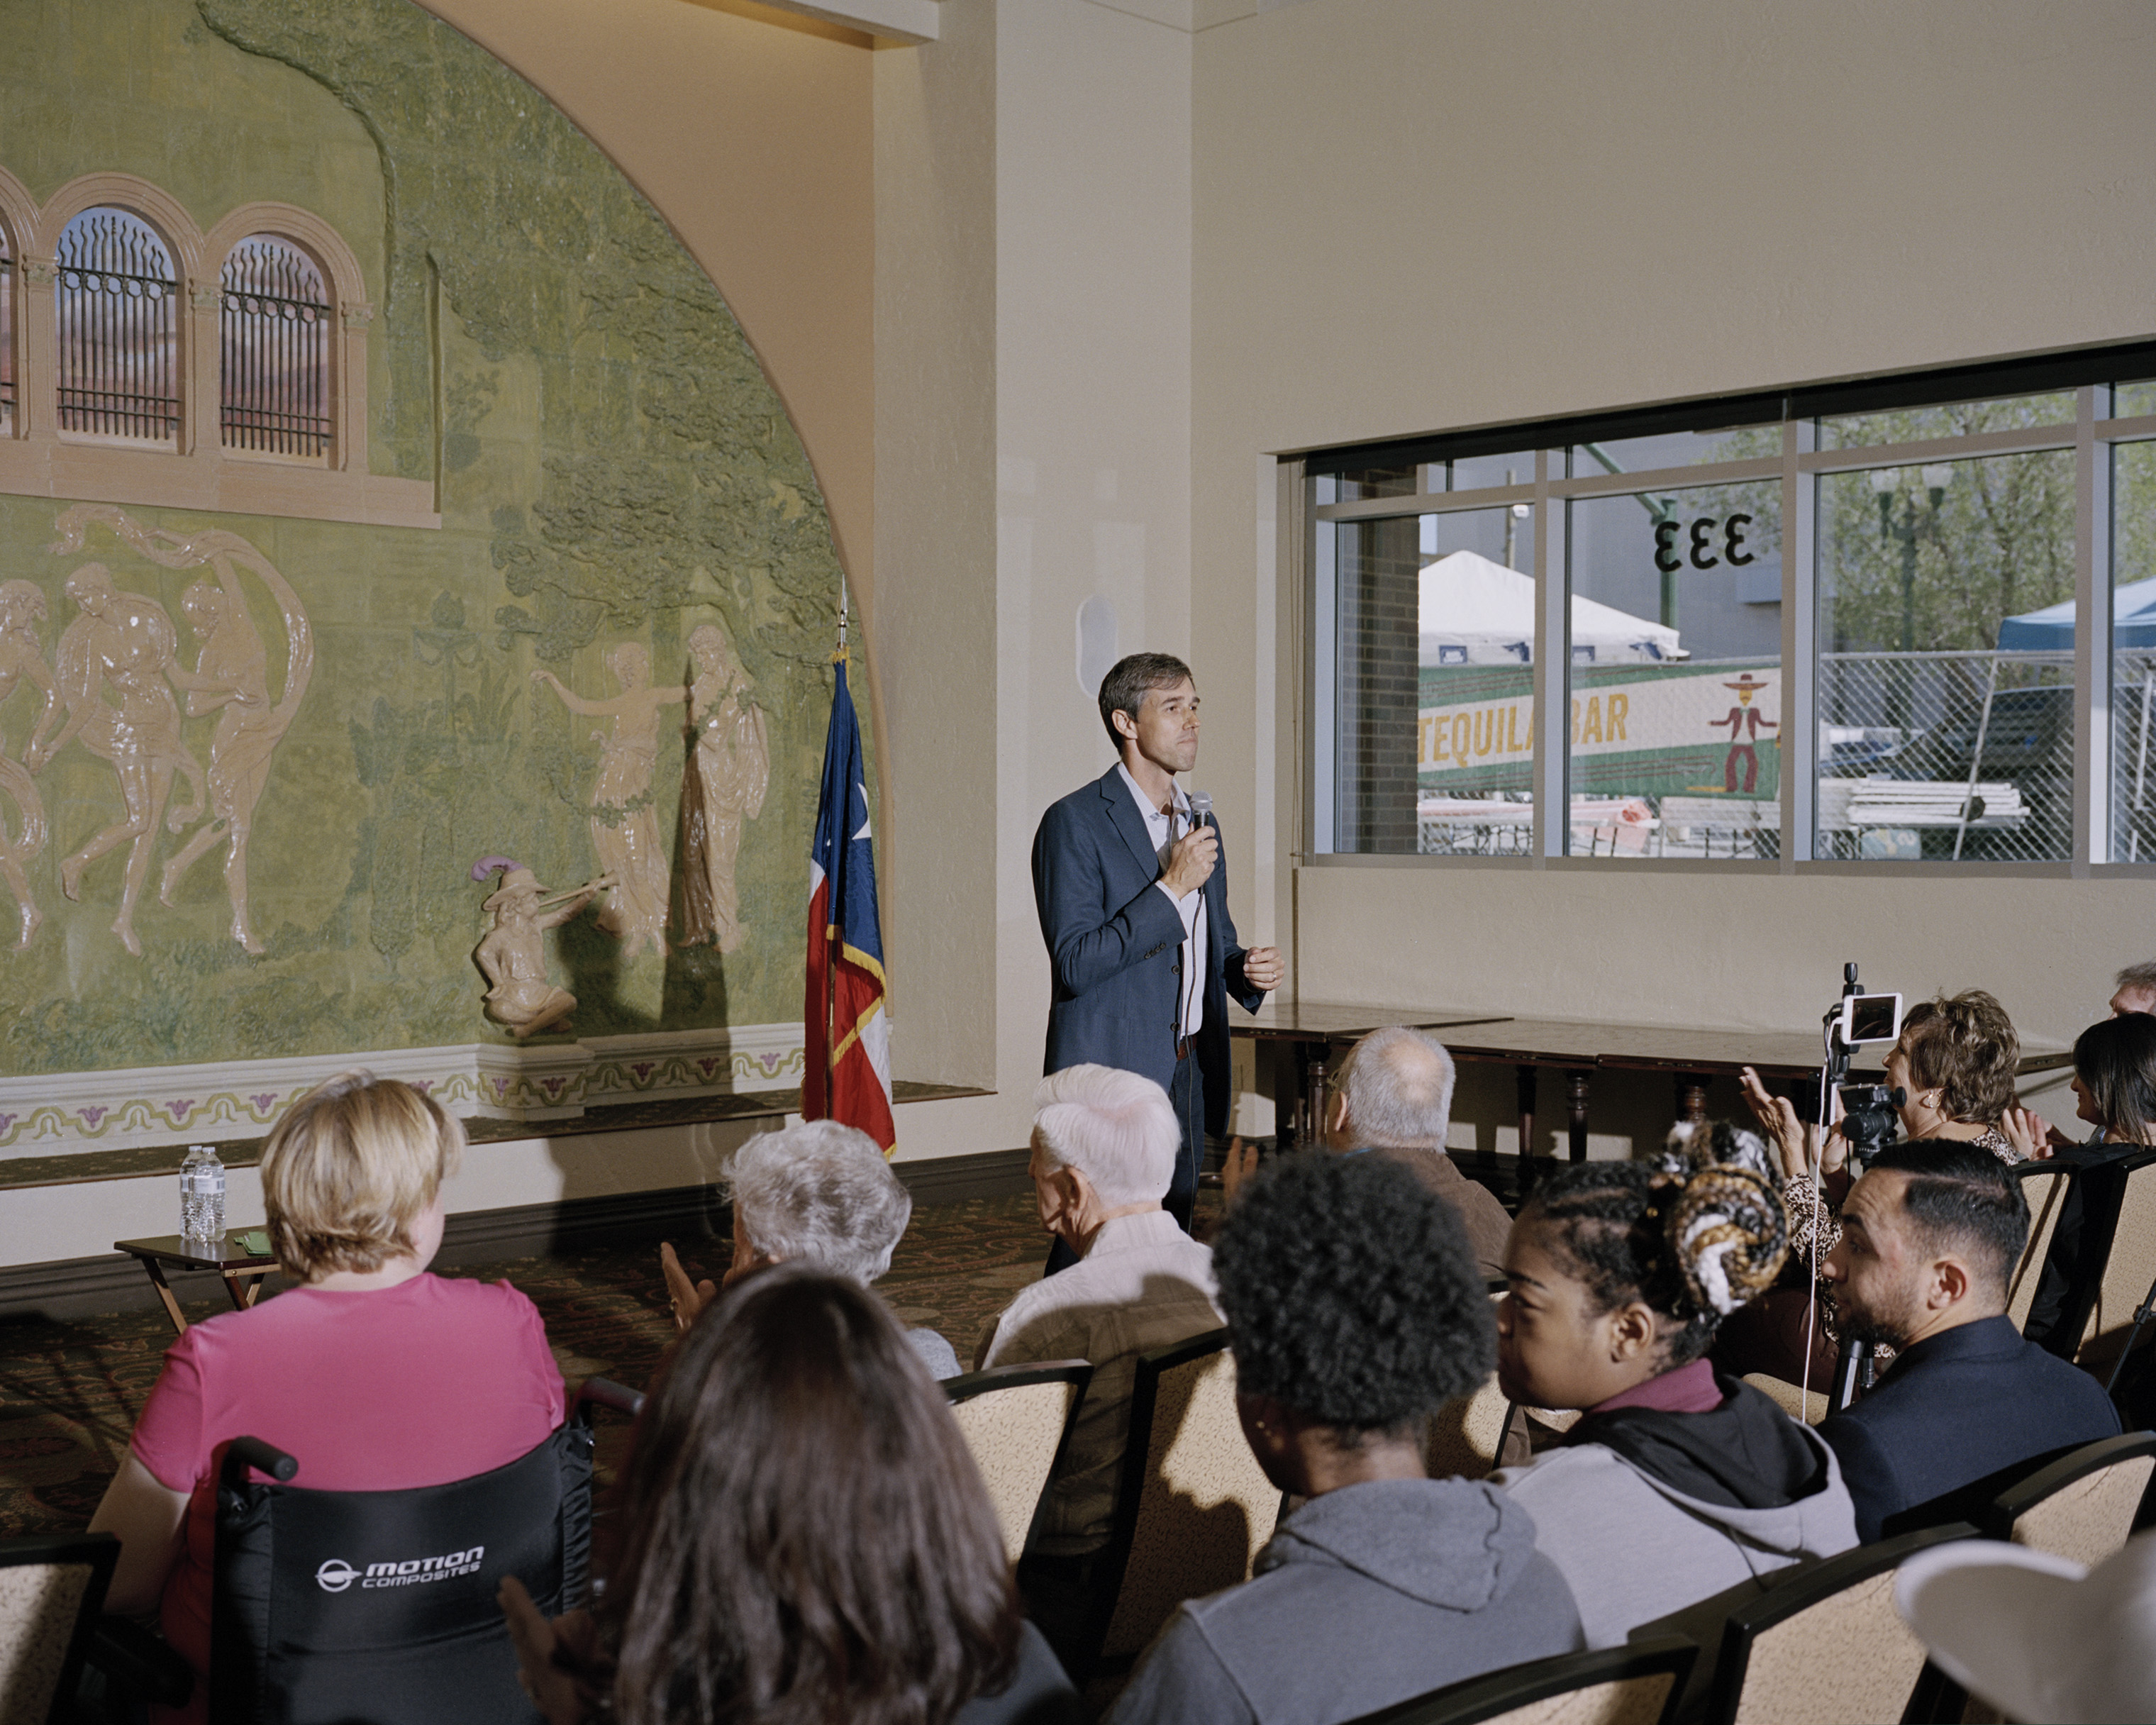 O'Rourke answers questions at a town hall meeting. (Benjamin Rasmussen for TIME)